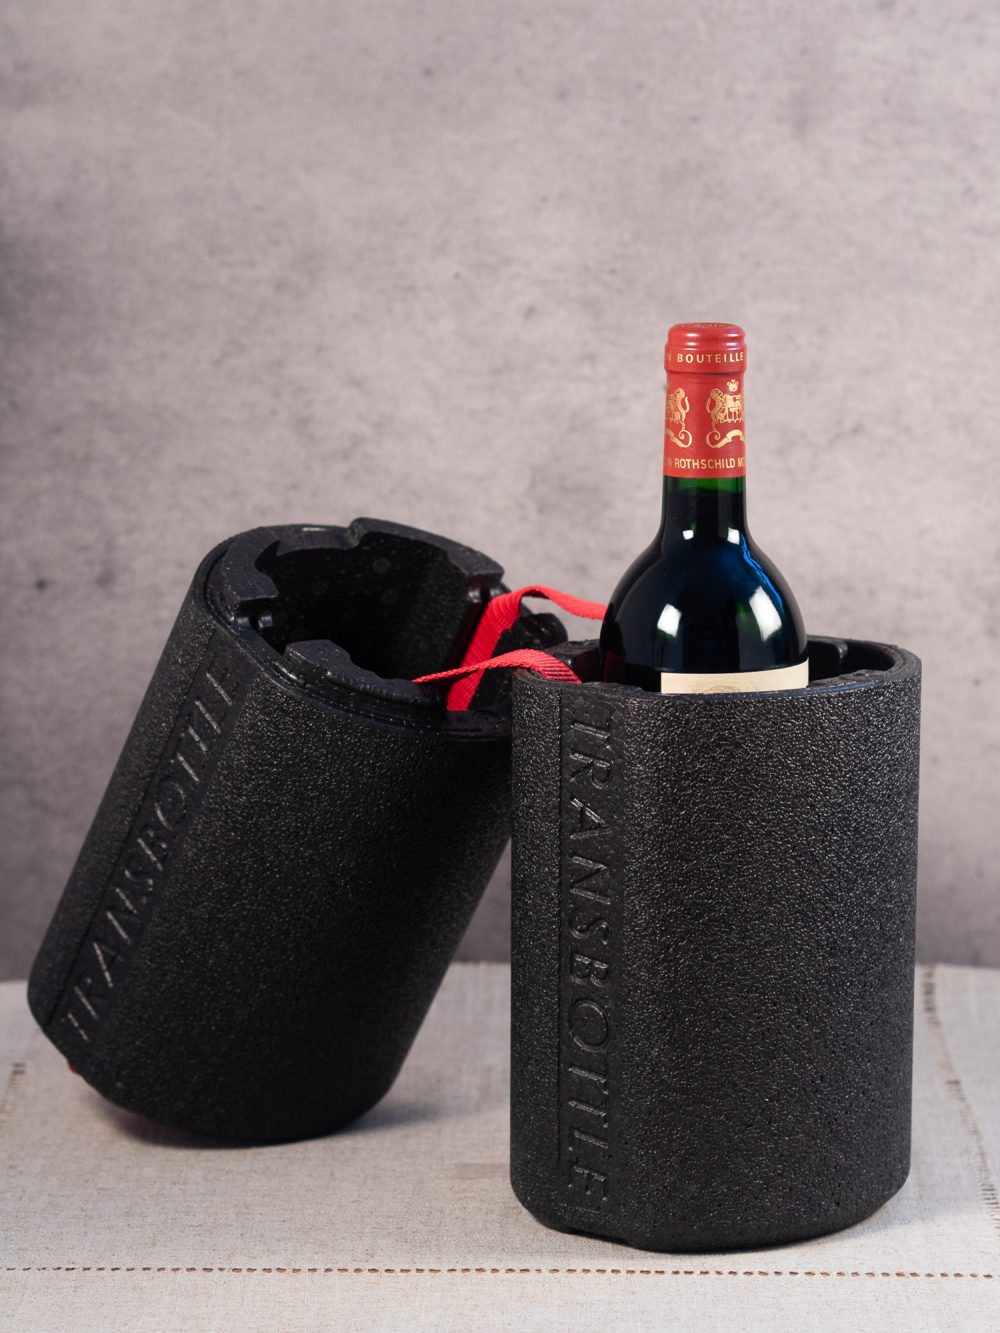 May Wines – Accessoire – Transbottle One